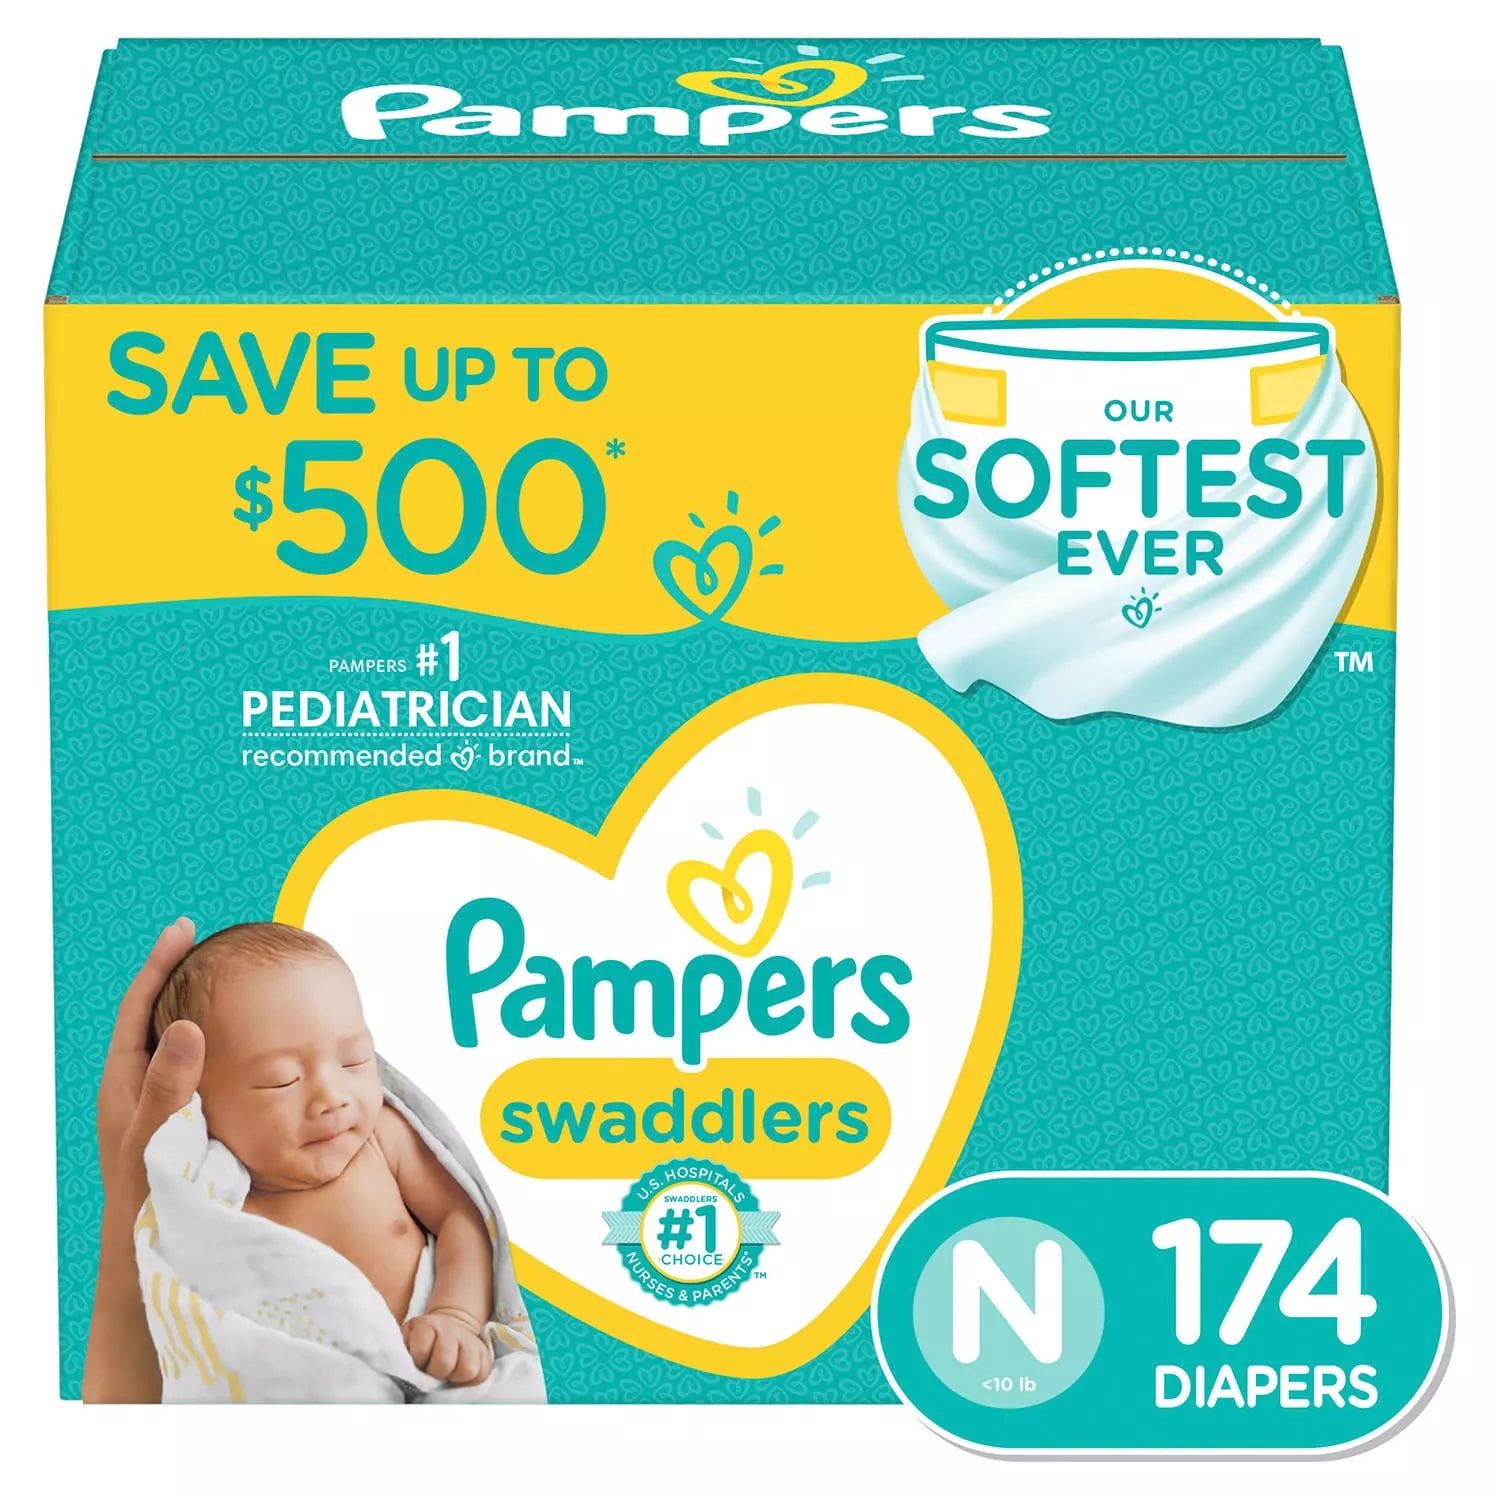 2 x 174 Count 864 Count Pampers Baby Diapers and Wipes Starter Kit 12X Pop-Top Packs with Sensitive Water Based Baby Wipes 2 Month Supply - Cruisers Disposable Baby Diapers 